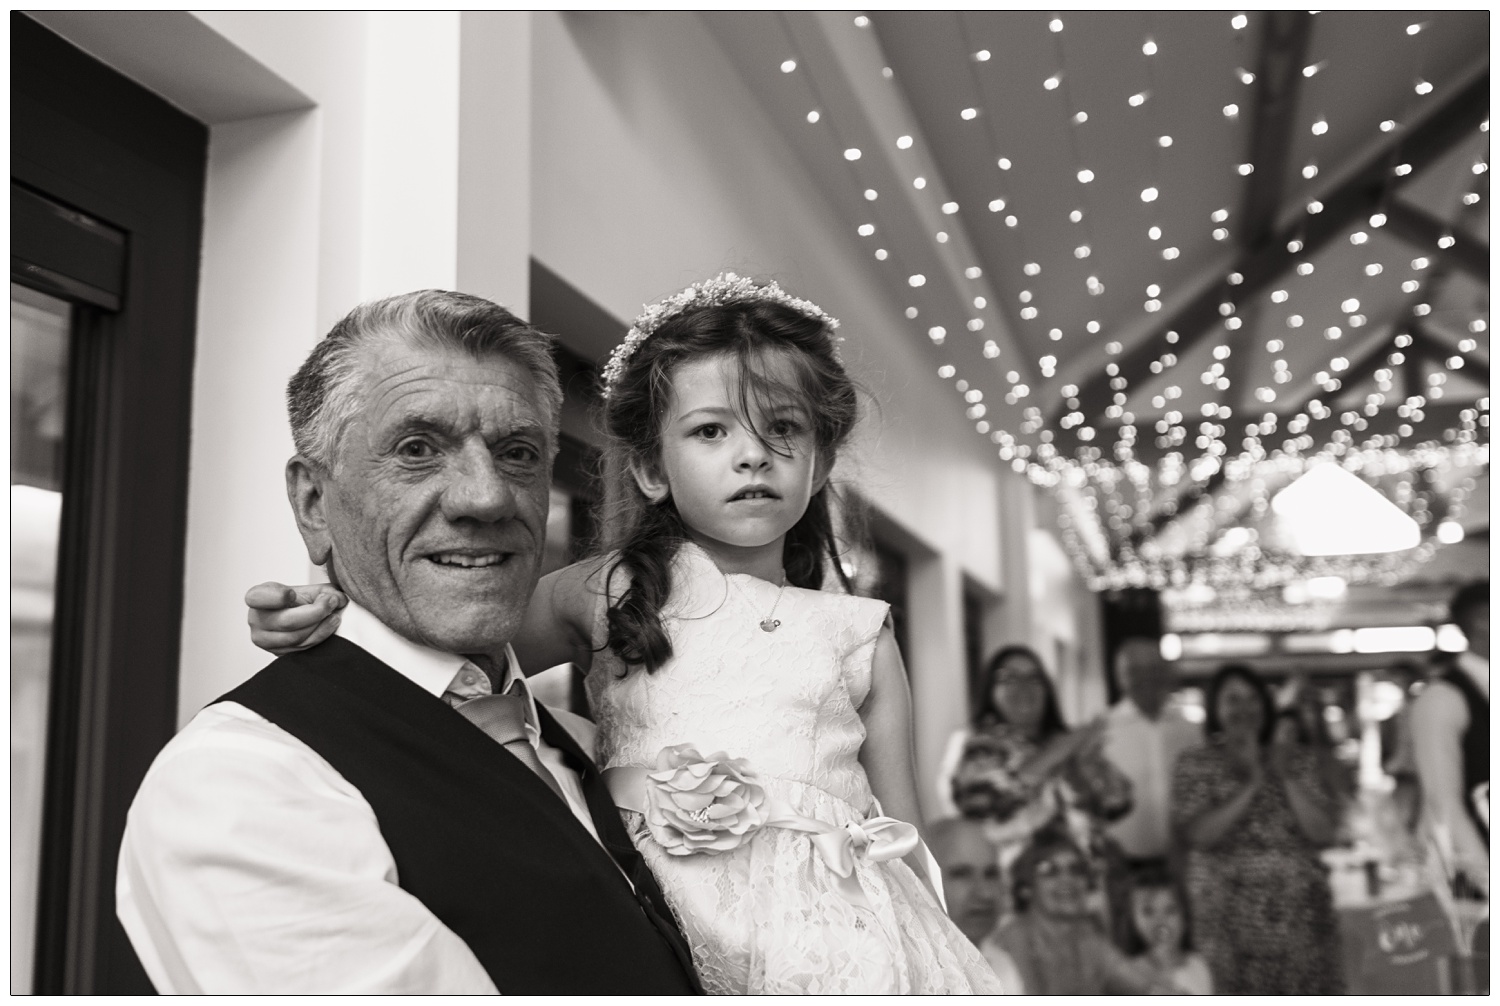 A man with his young granddaughter. She is wearing a flower girl dress.